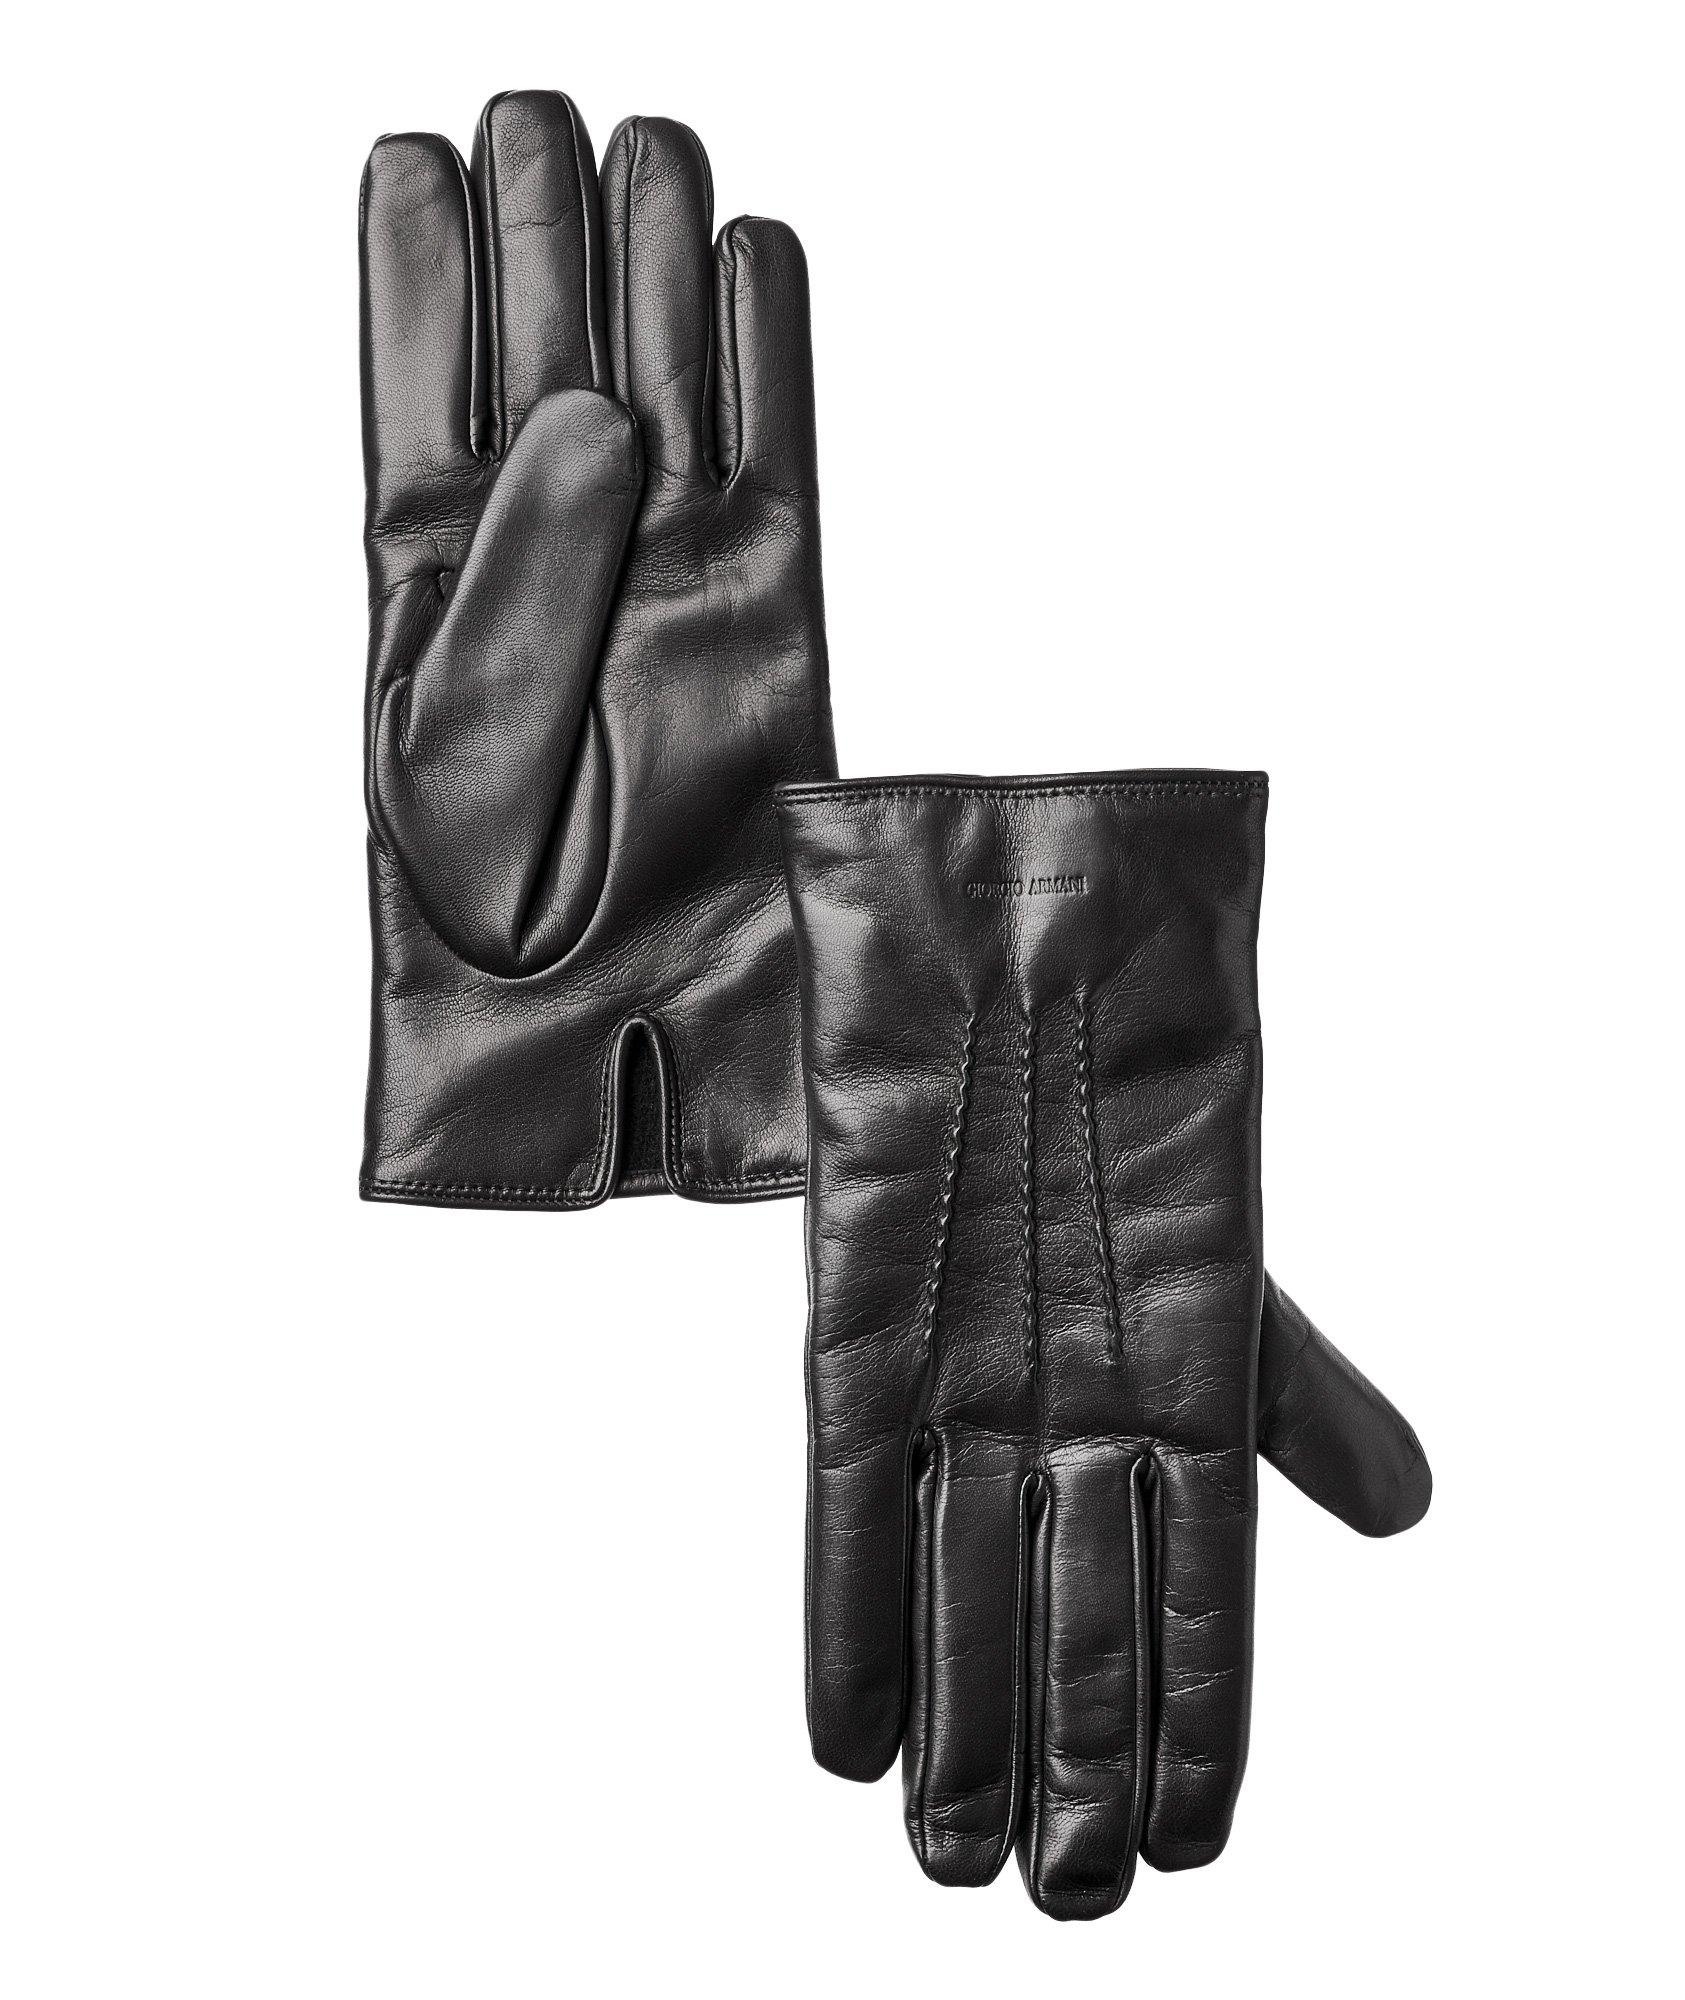 Nappa Leather Gloves image 0